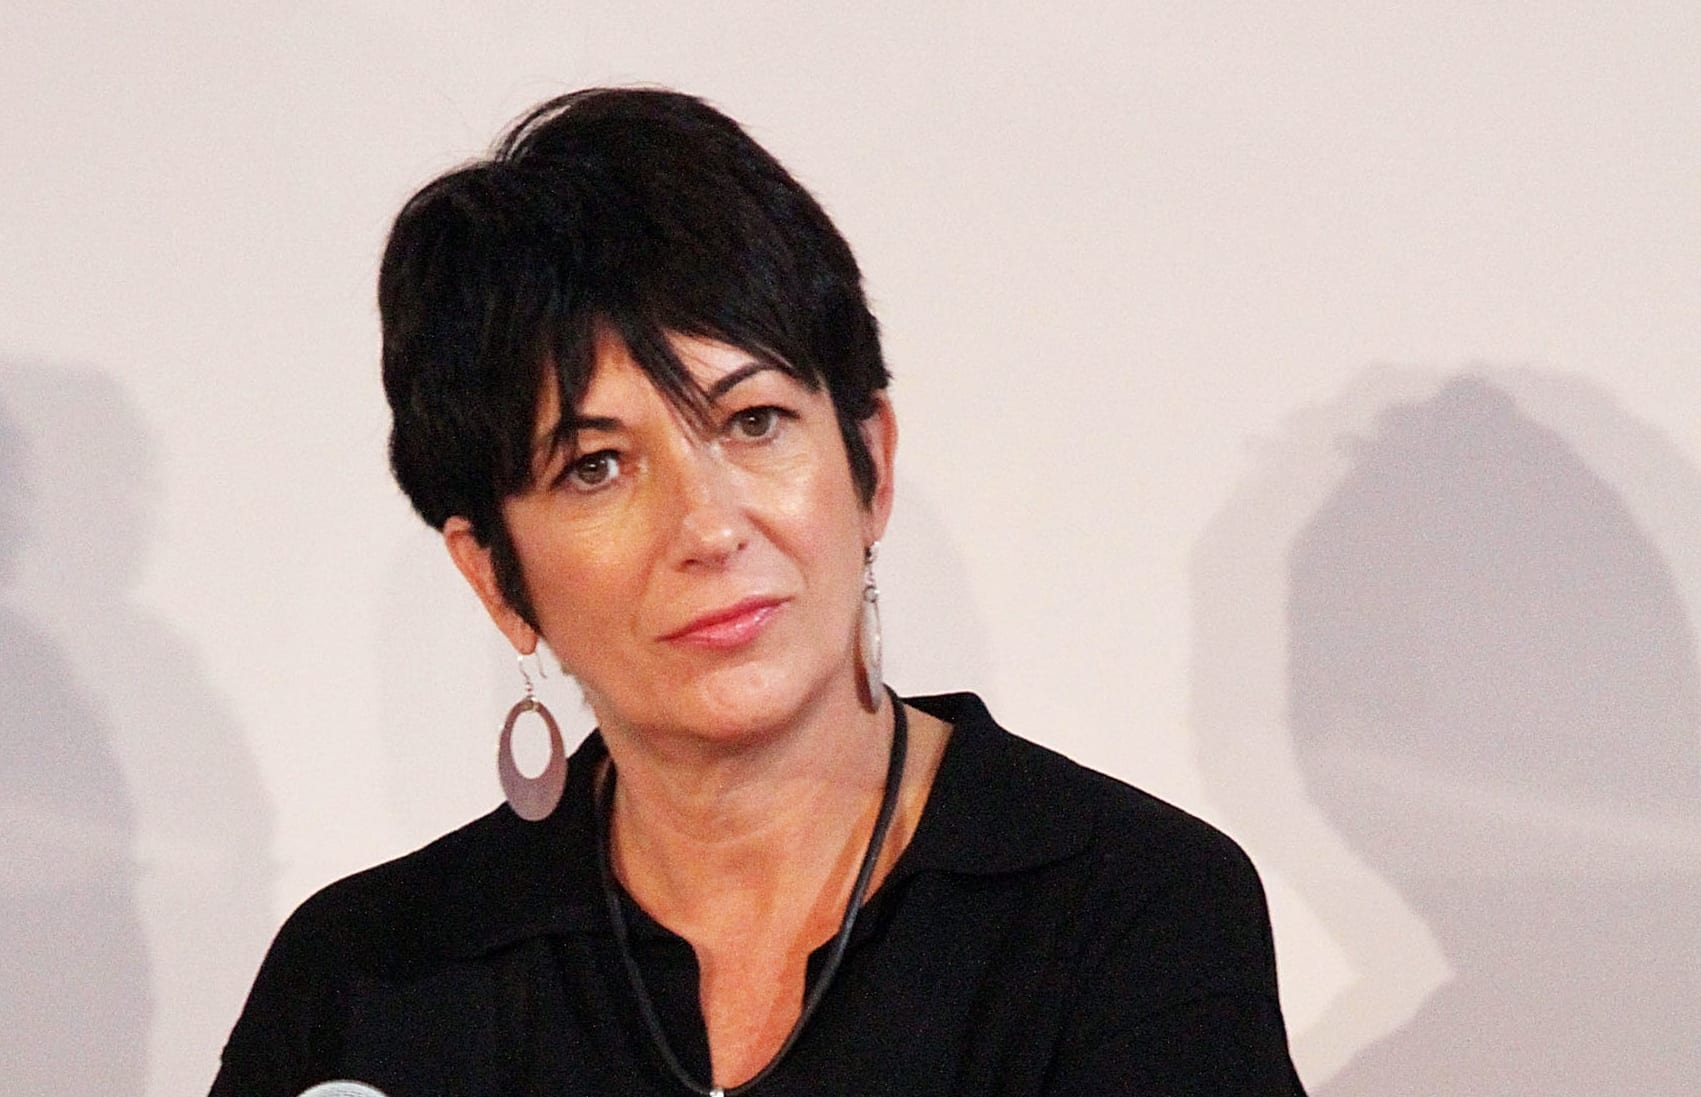 Ghislaine Maxwell attends 4th Annual WIE Symposium at Center 548 on September 20, 2013 in New York City.